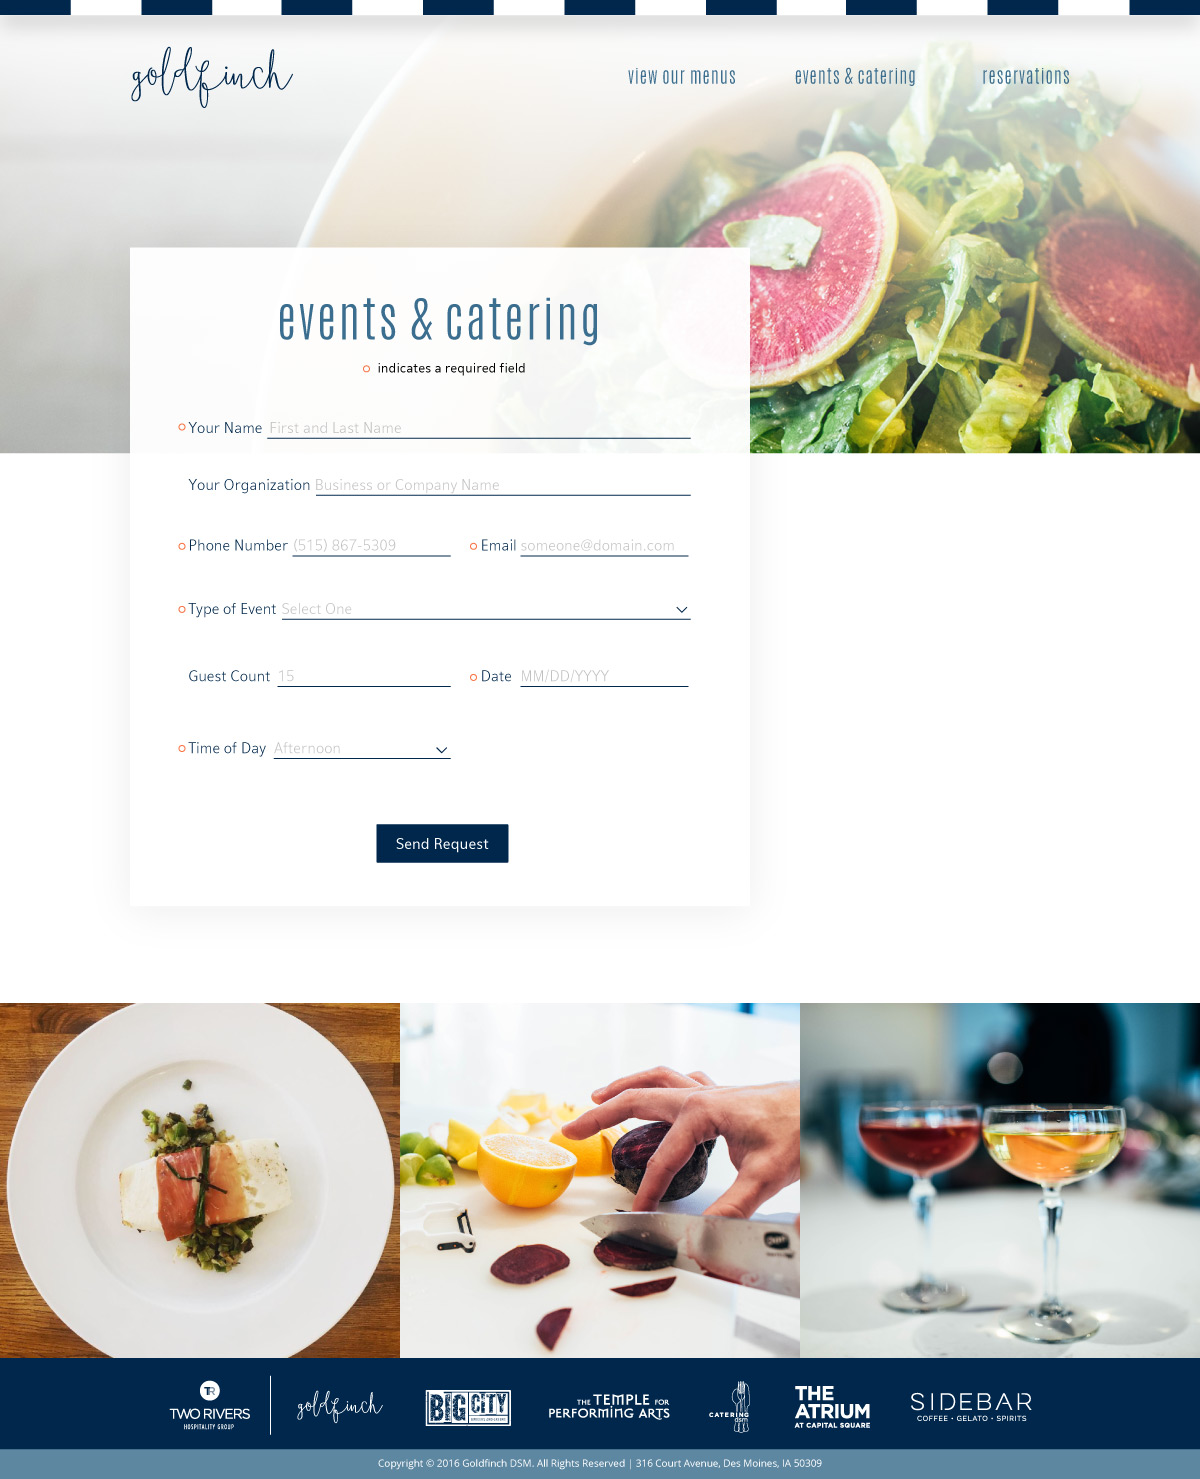 website form for submitting a catering request